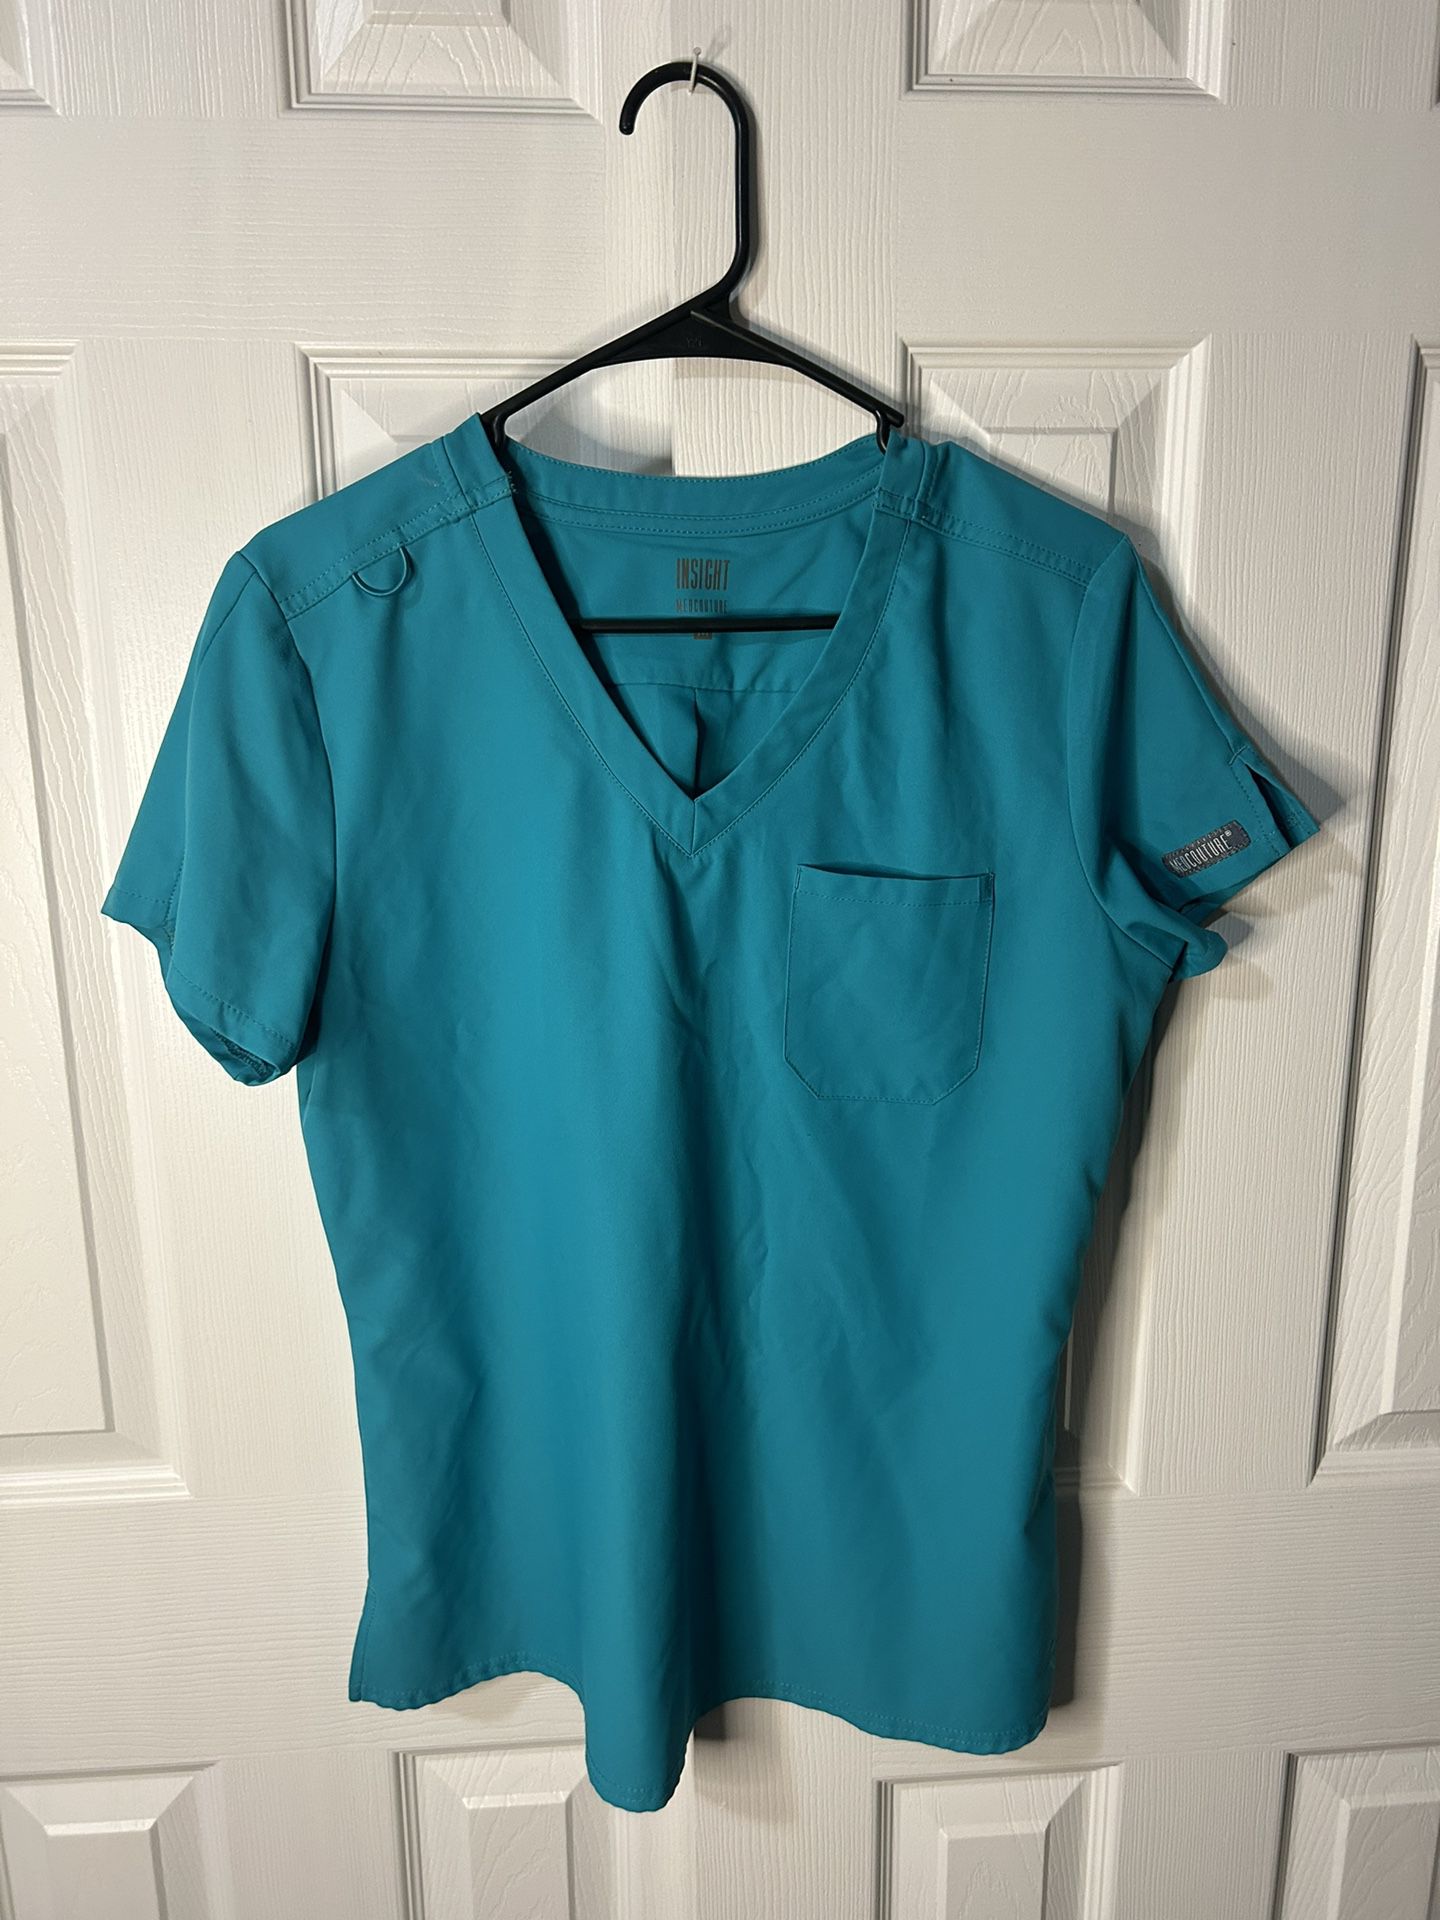 Teal Scrubs for sale